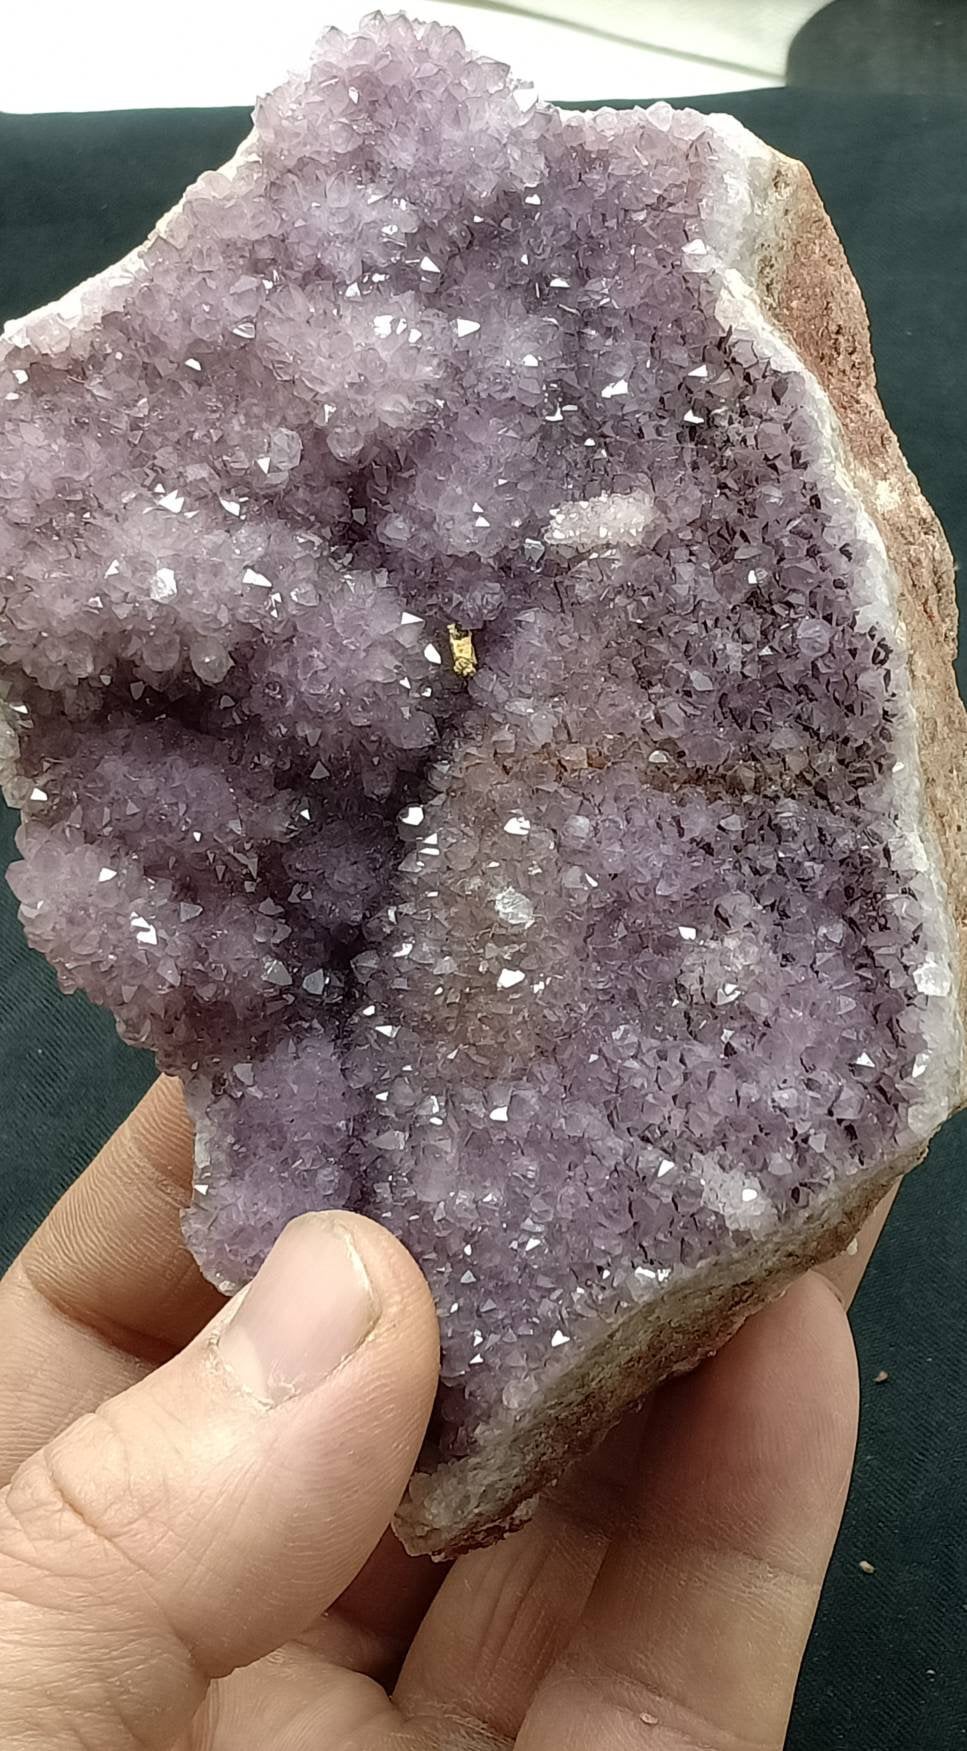 Drusy Amethyst crystals Cluster plate